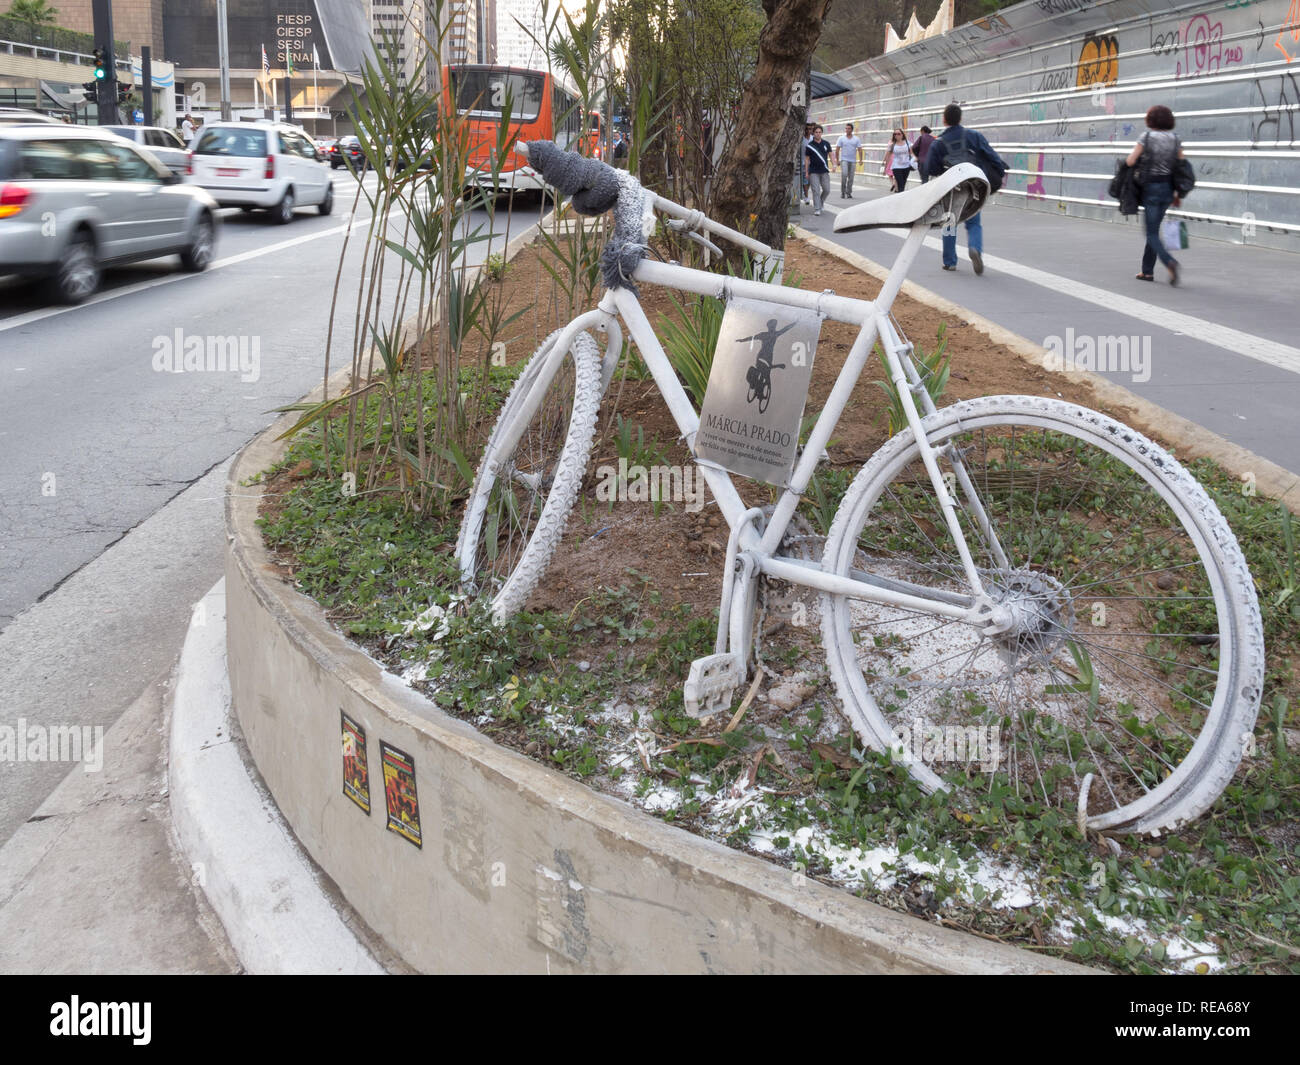 Ghost bike, bicycle painted white as form of roadside memorial, placed where a cyclist has been killed or severely injured, Sao Paulo, Brazil Stock Photo